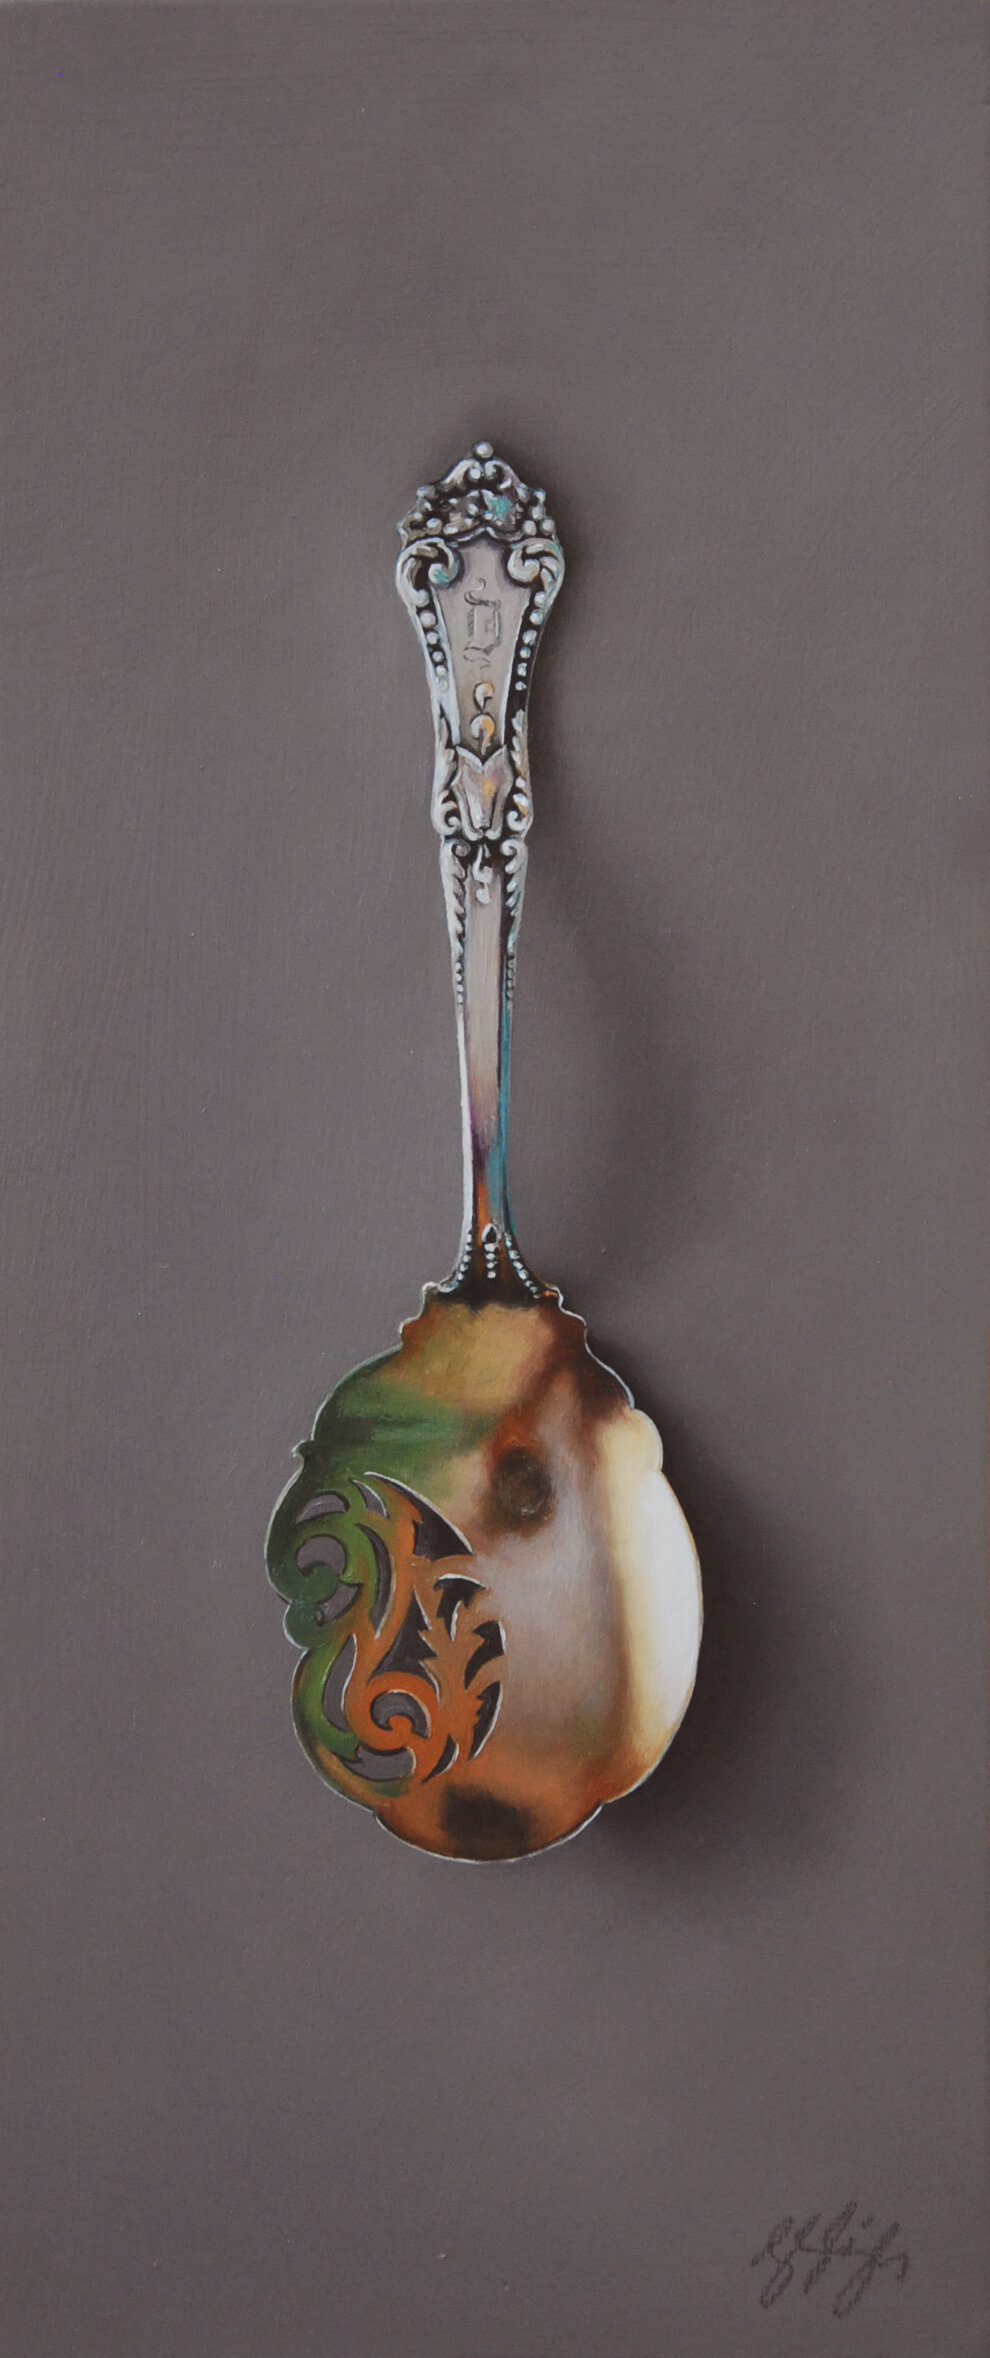   Silver Spoon #107, The Goddess  Oil on panel, 2015. 12x5” 